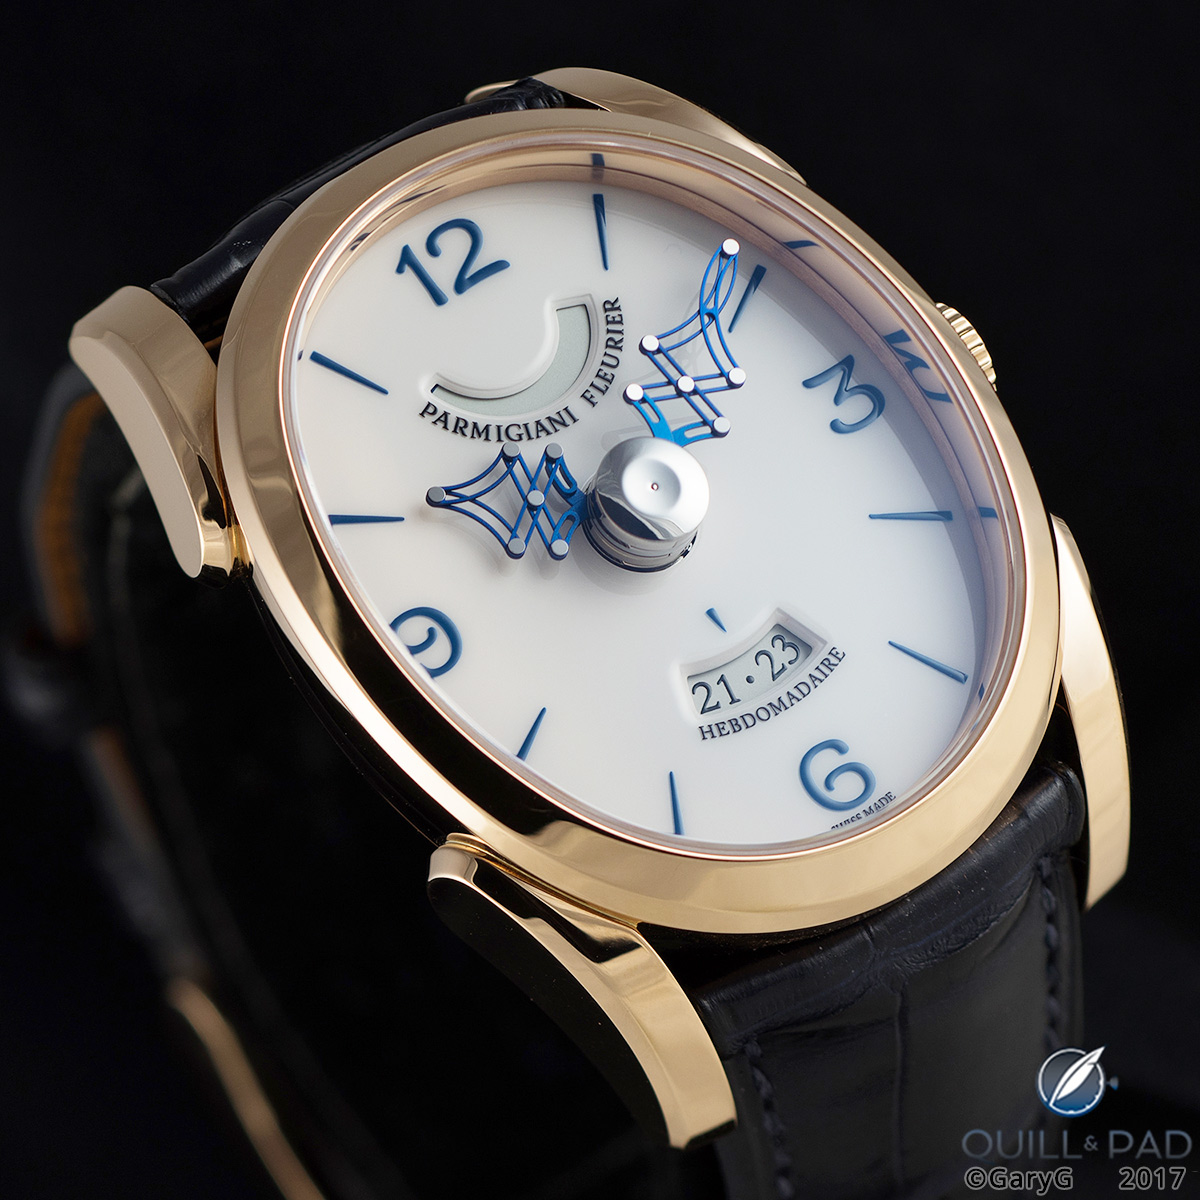 The Parmigiani Ovale Pantographe in red gold